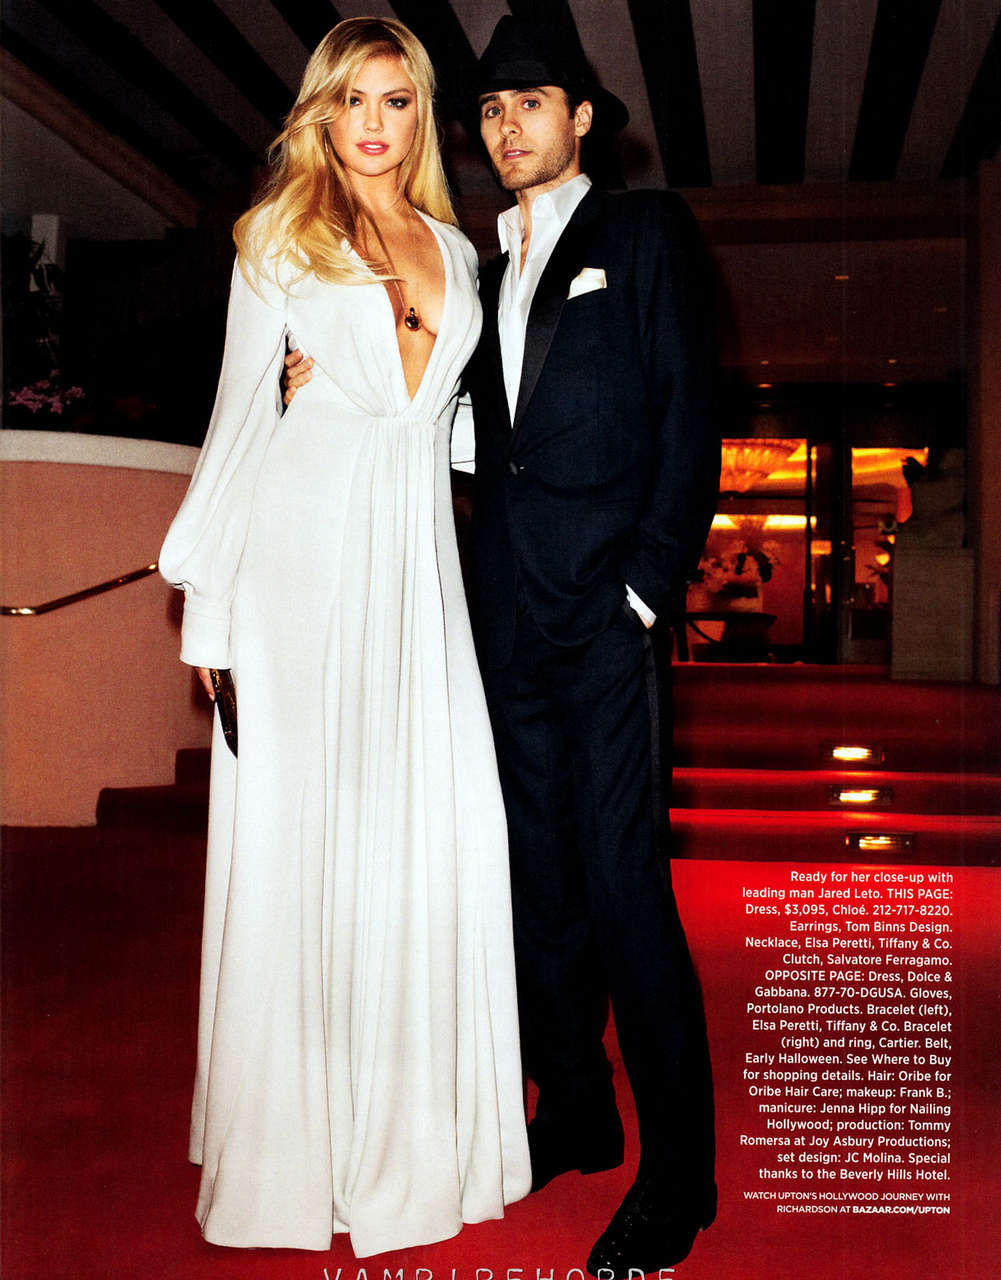 Kate Upton Harpers Bazaar Magazine May 2012 Issue